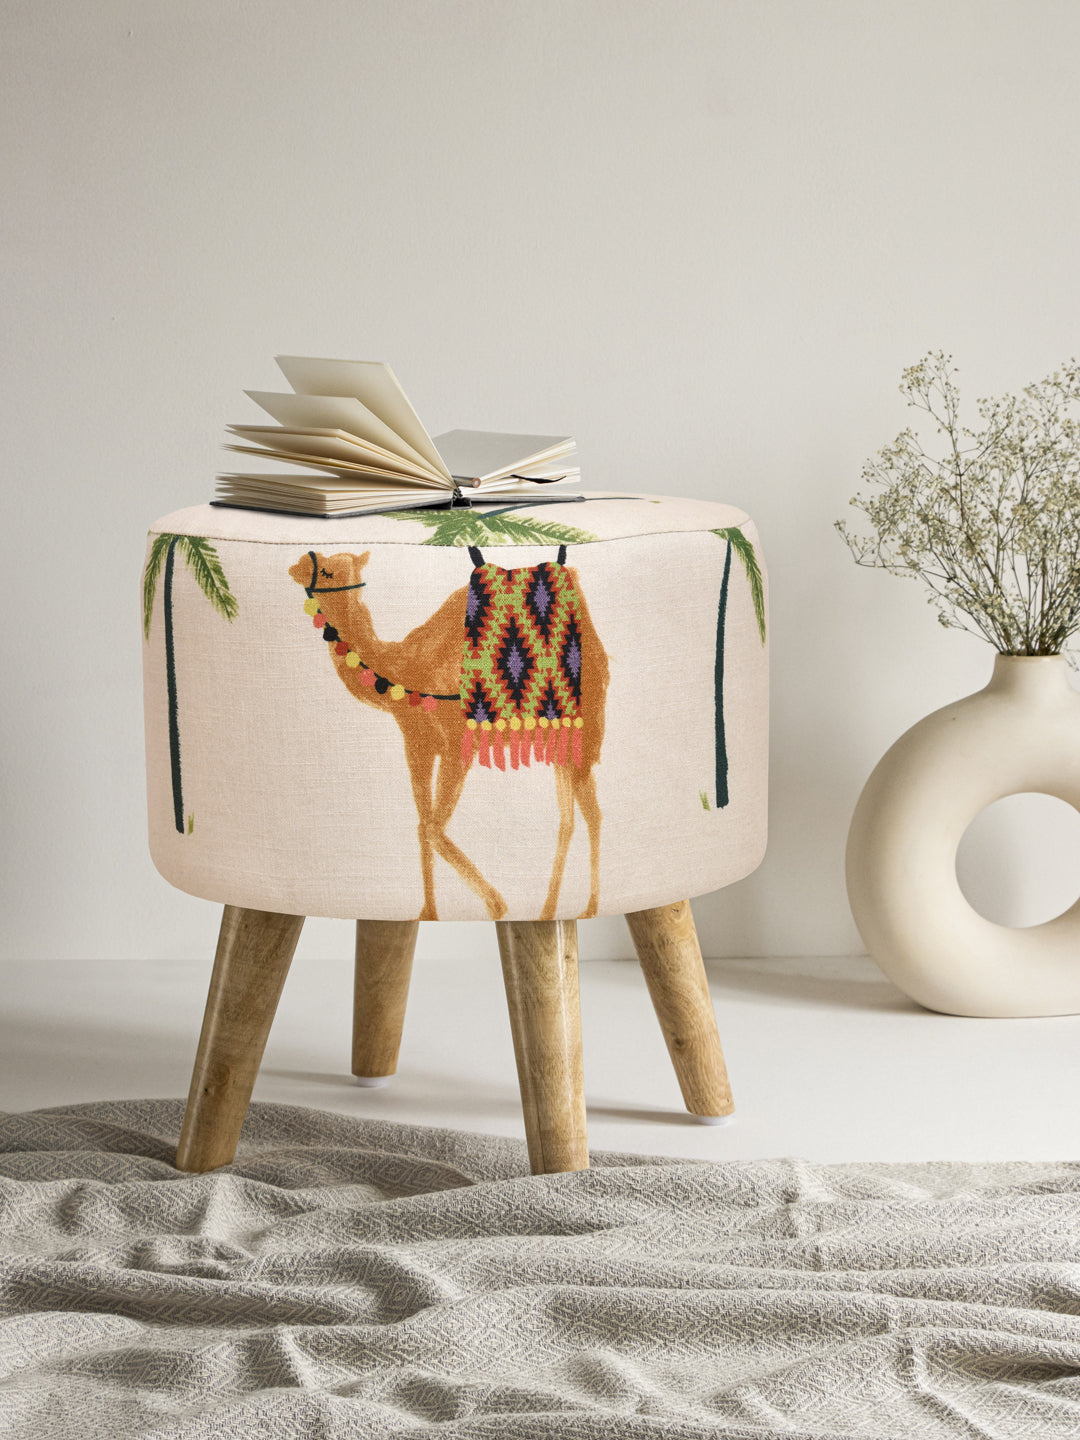 Stool With Wooden Legs; Camel On Beige